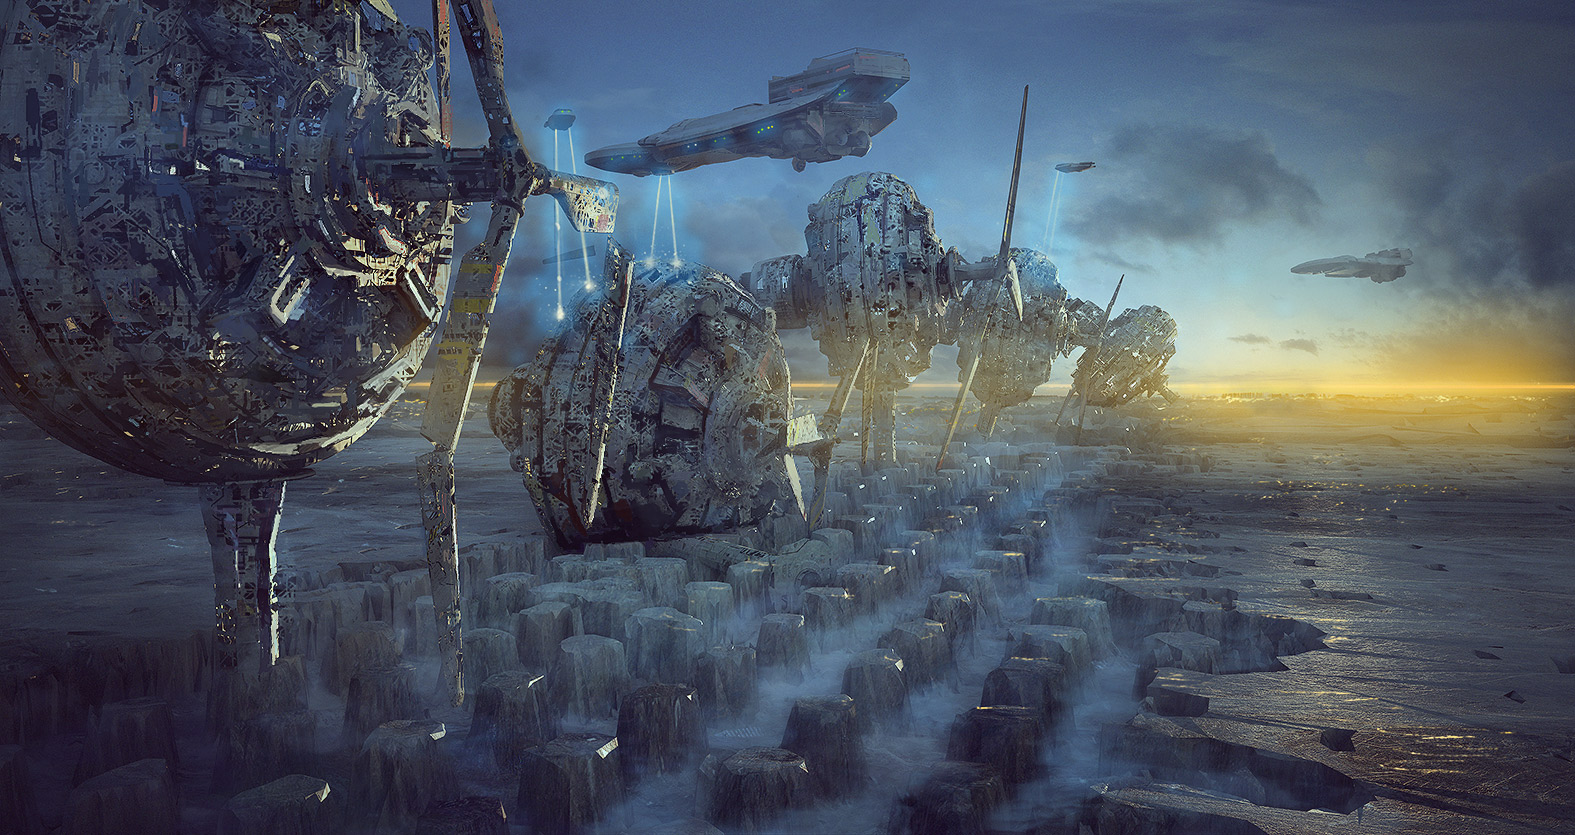 Stunning Sci-Fi Concept Sketches Are Actually 3D Renders